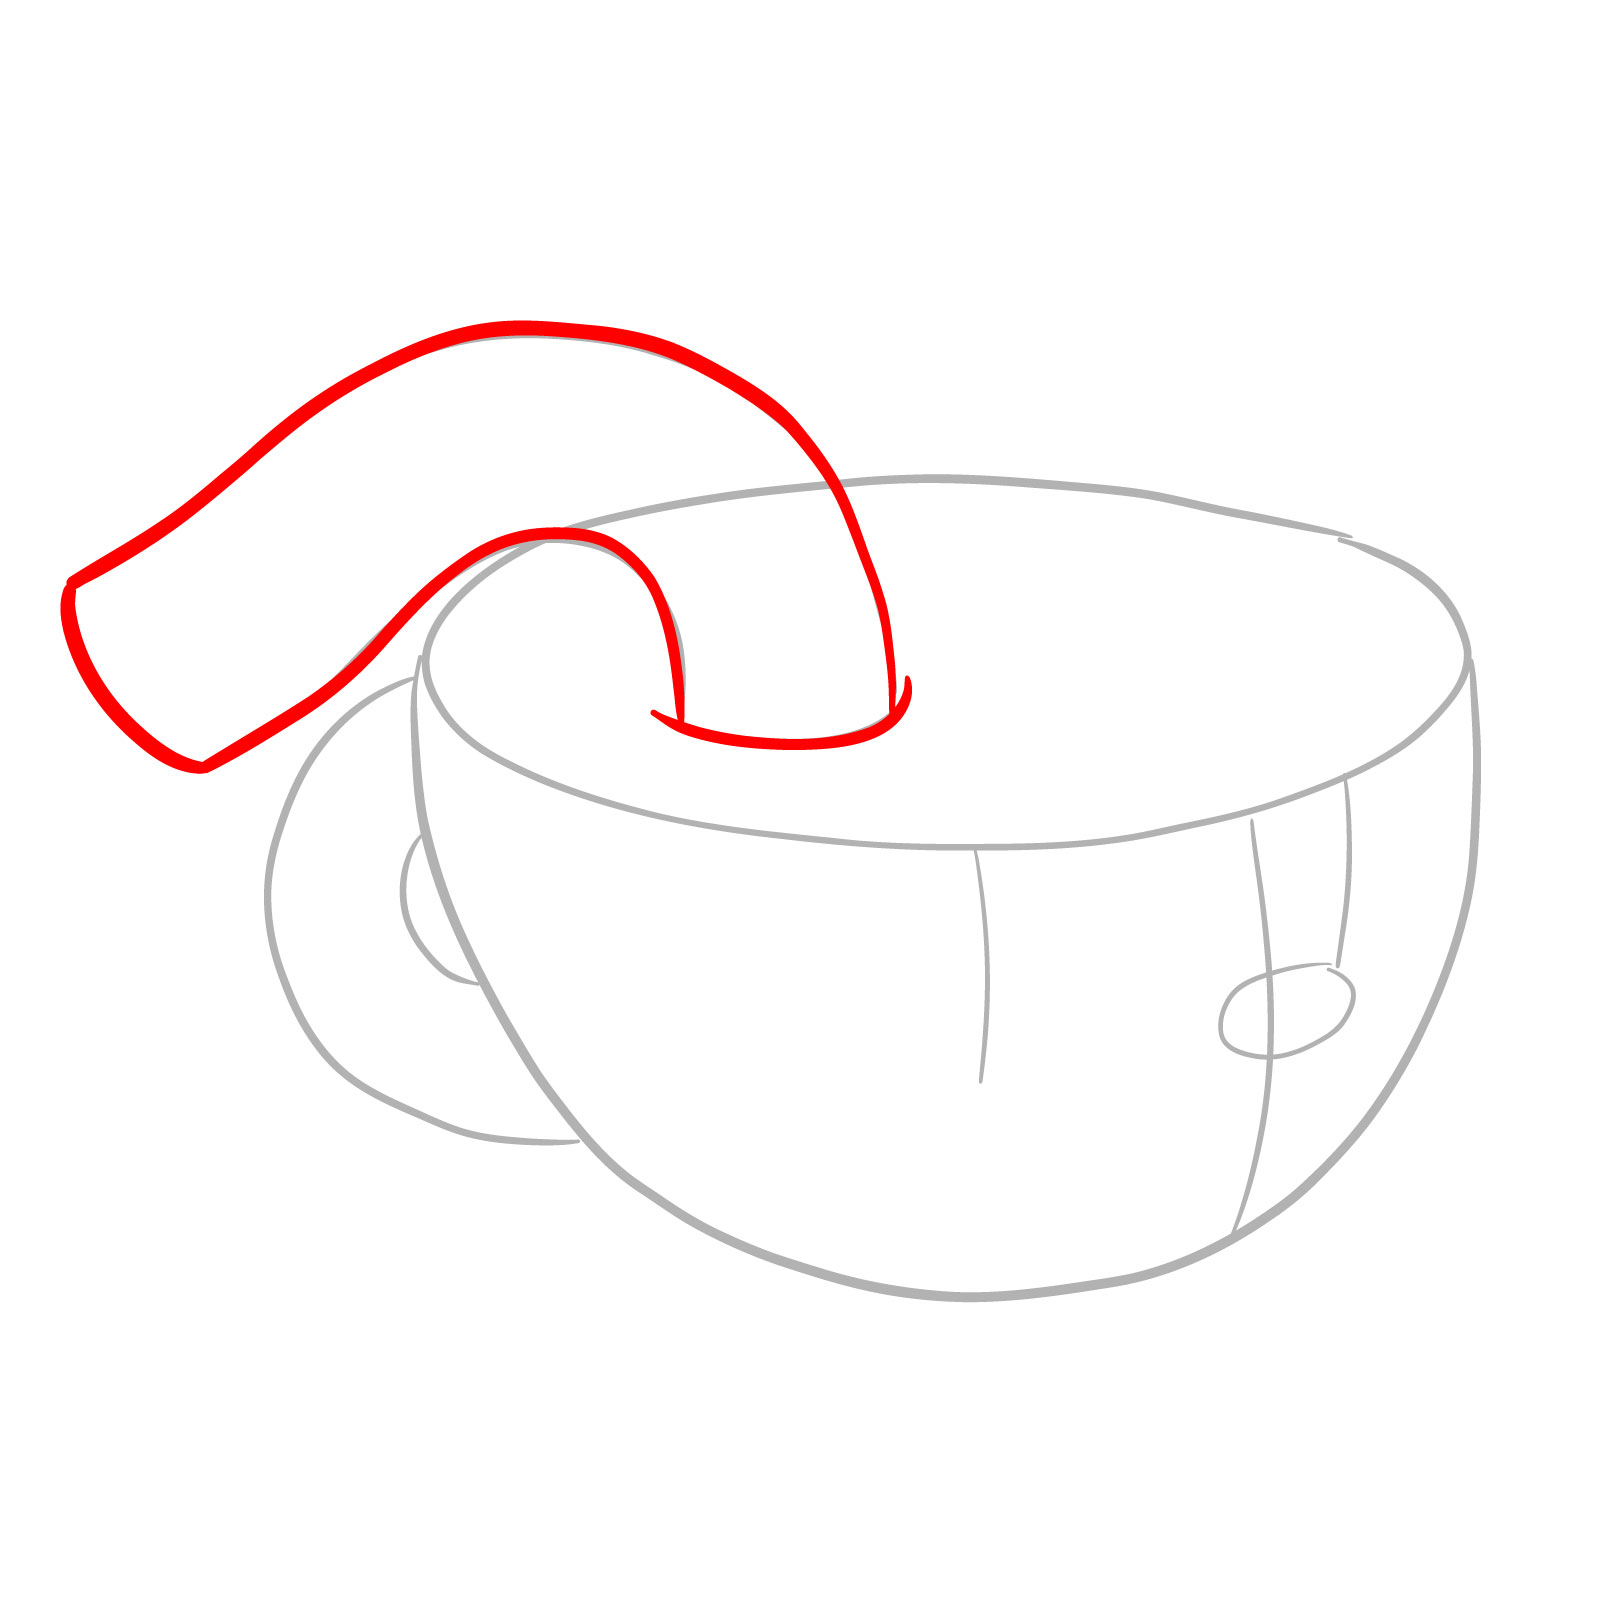 How to draw Cuphead's face - Invincibility Super Art - step 03